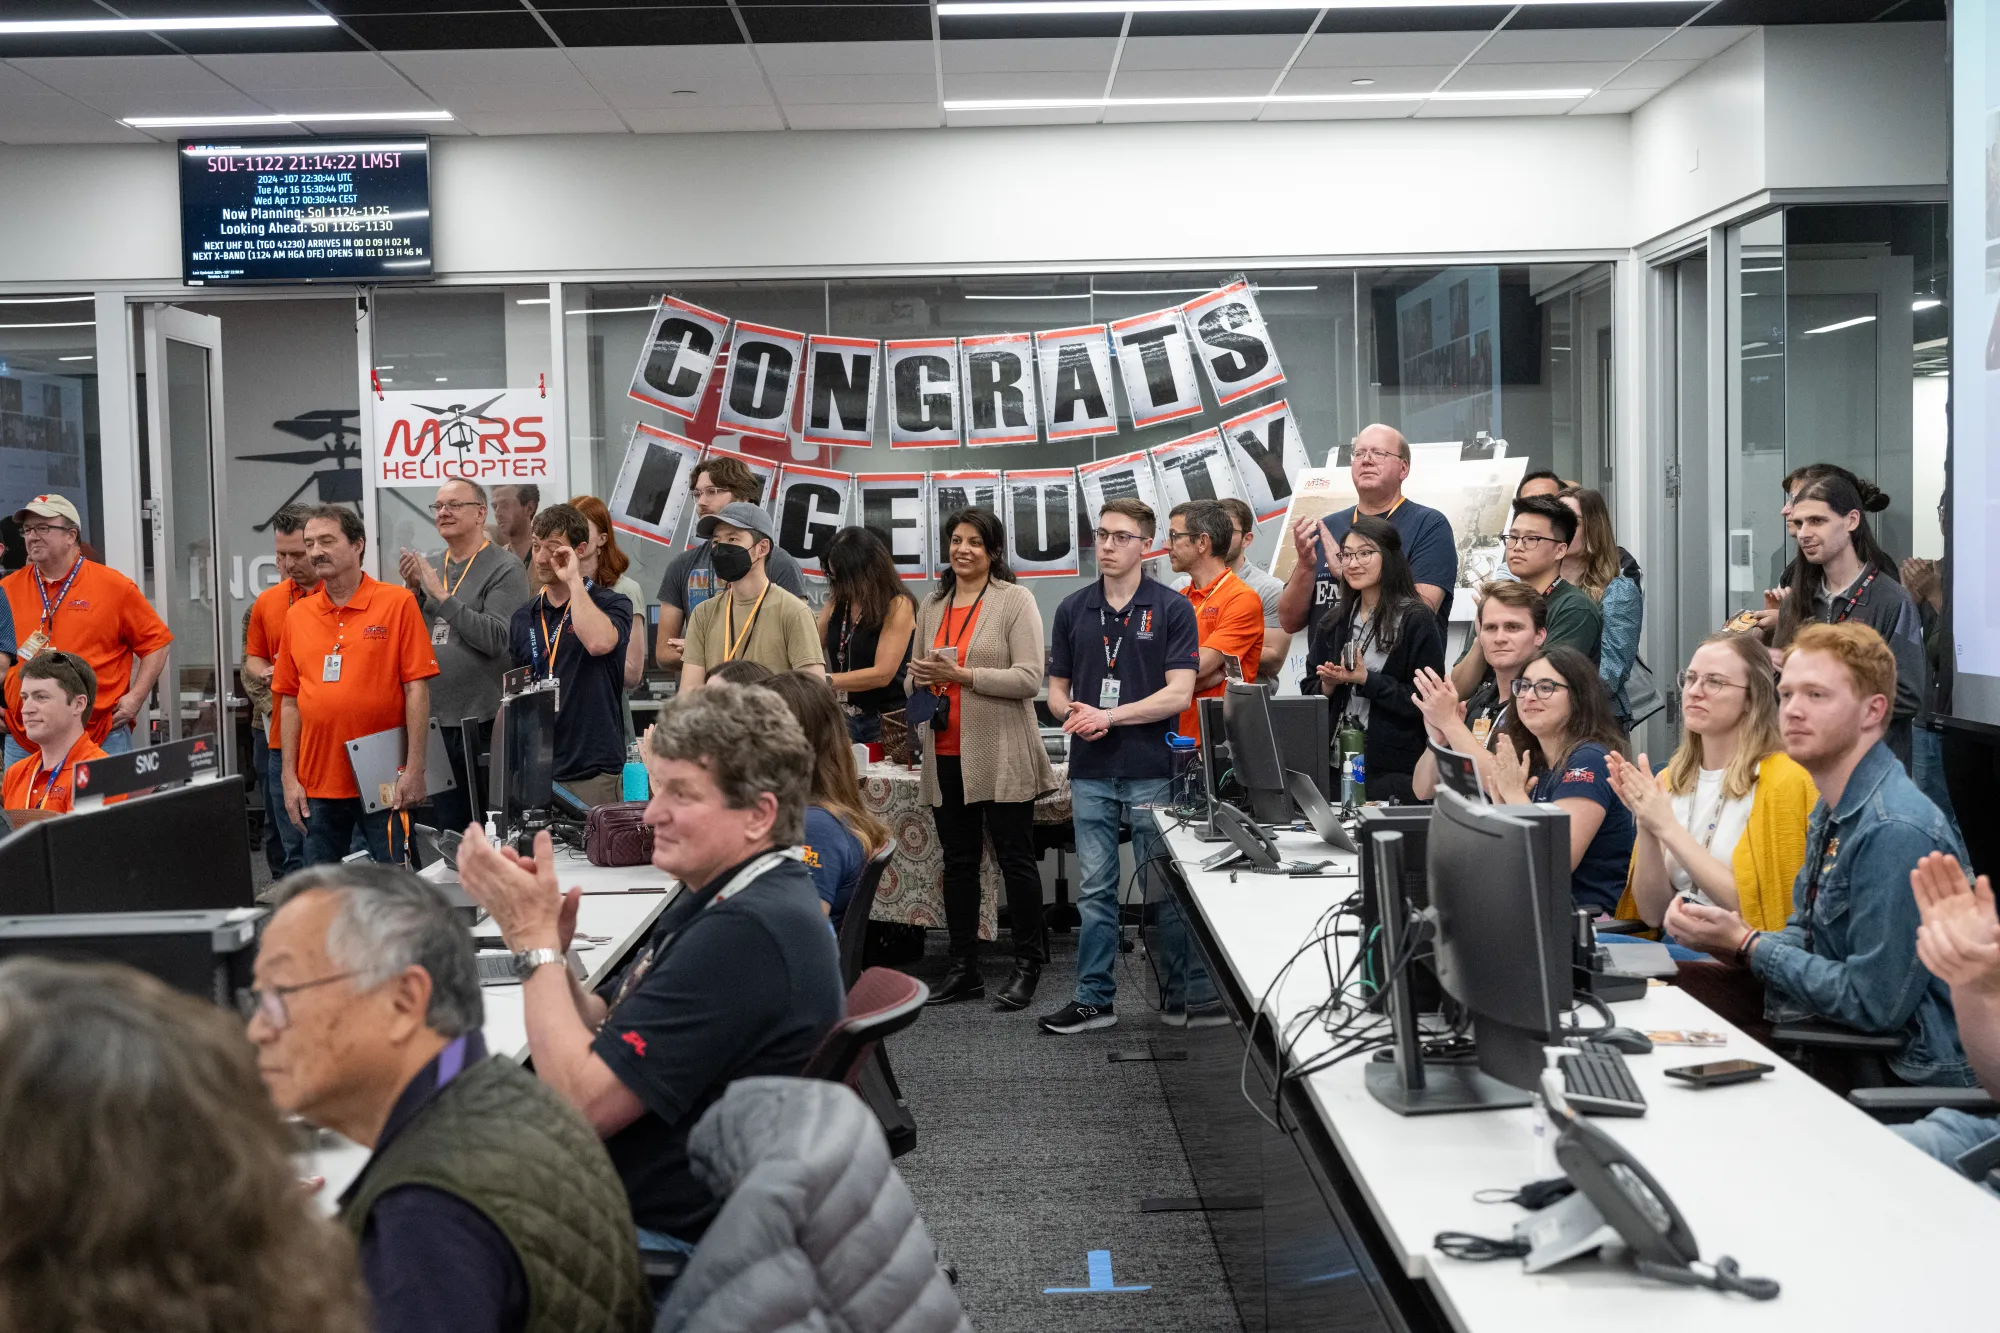 People gathered in control room with "Congrats Ingenuity" banner on back wall